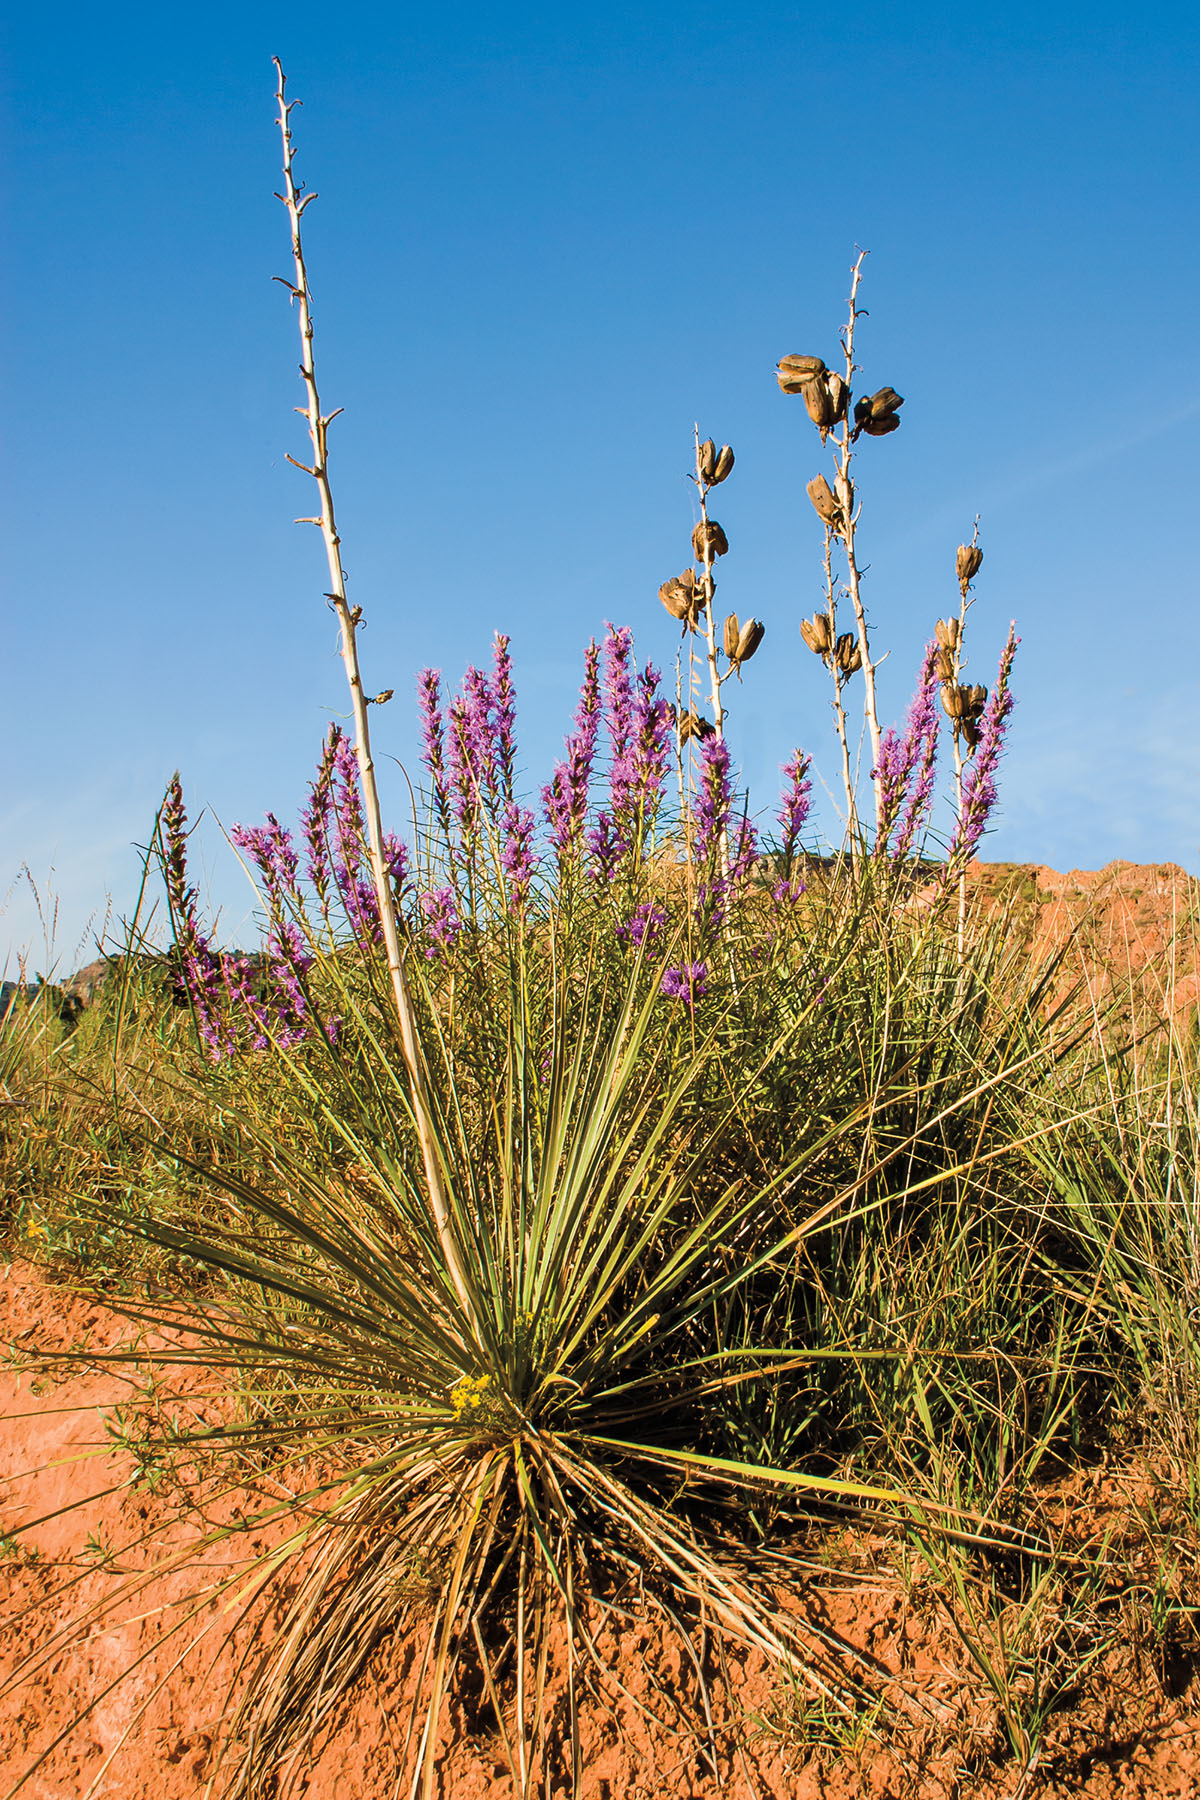 Tall purple flowers grow from the vines of a yucca plant